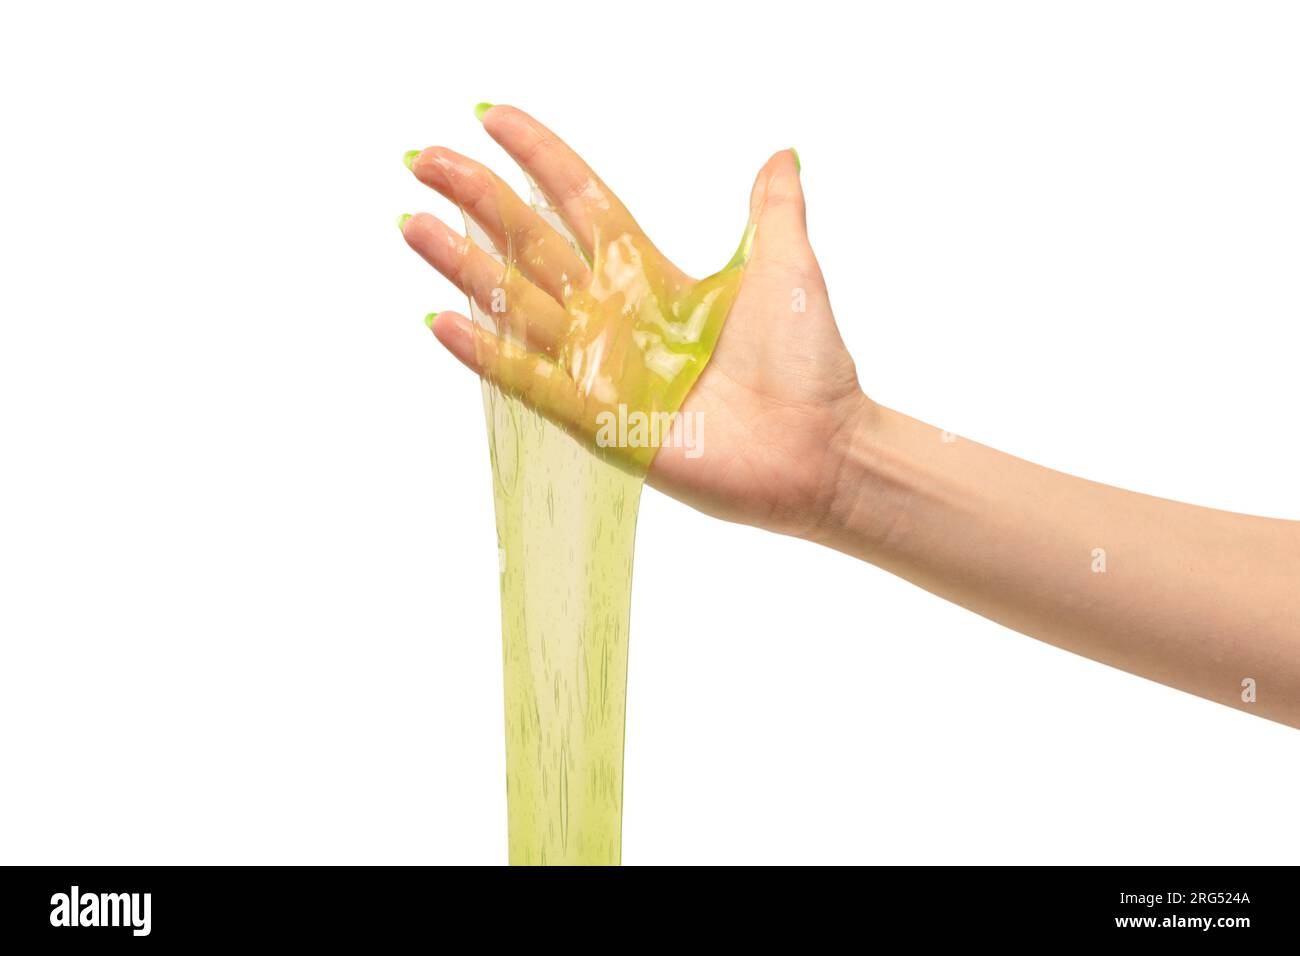 Hand Showing Fist With Neon Green Slime Toy On Pink Pop Art Backgound Stock  Photo - Download Image Now - iStock